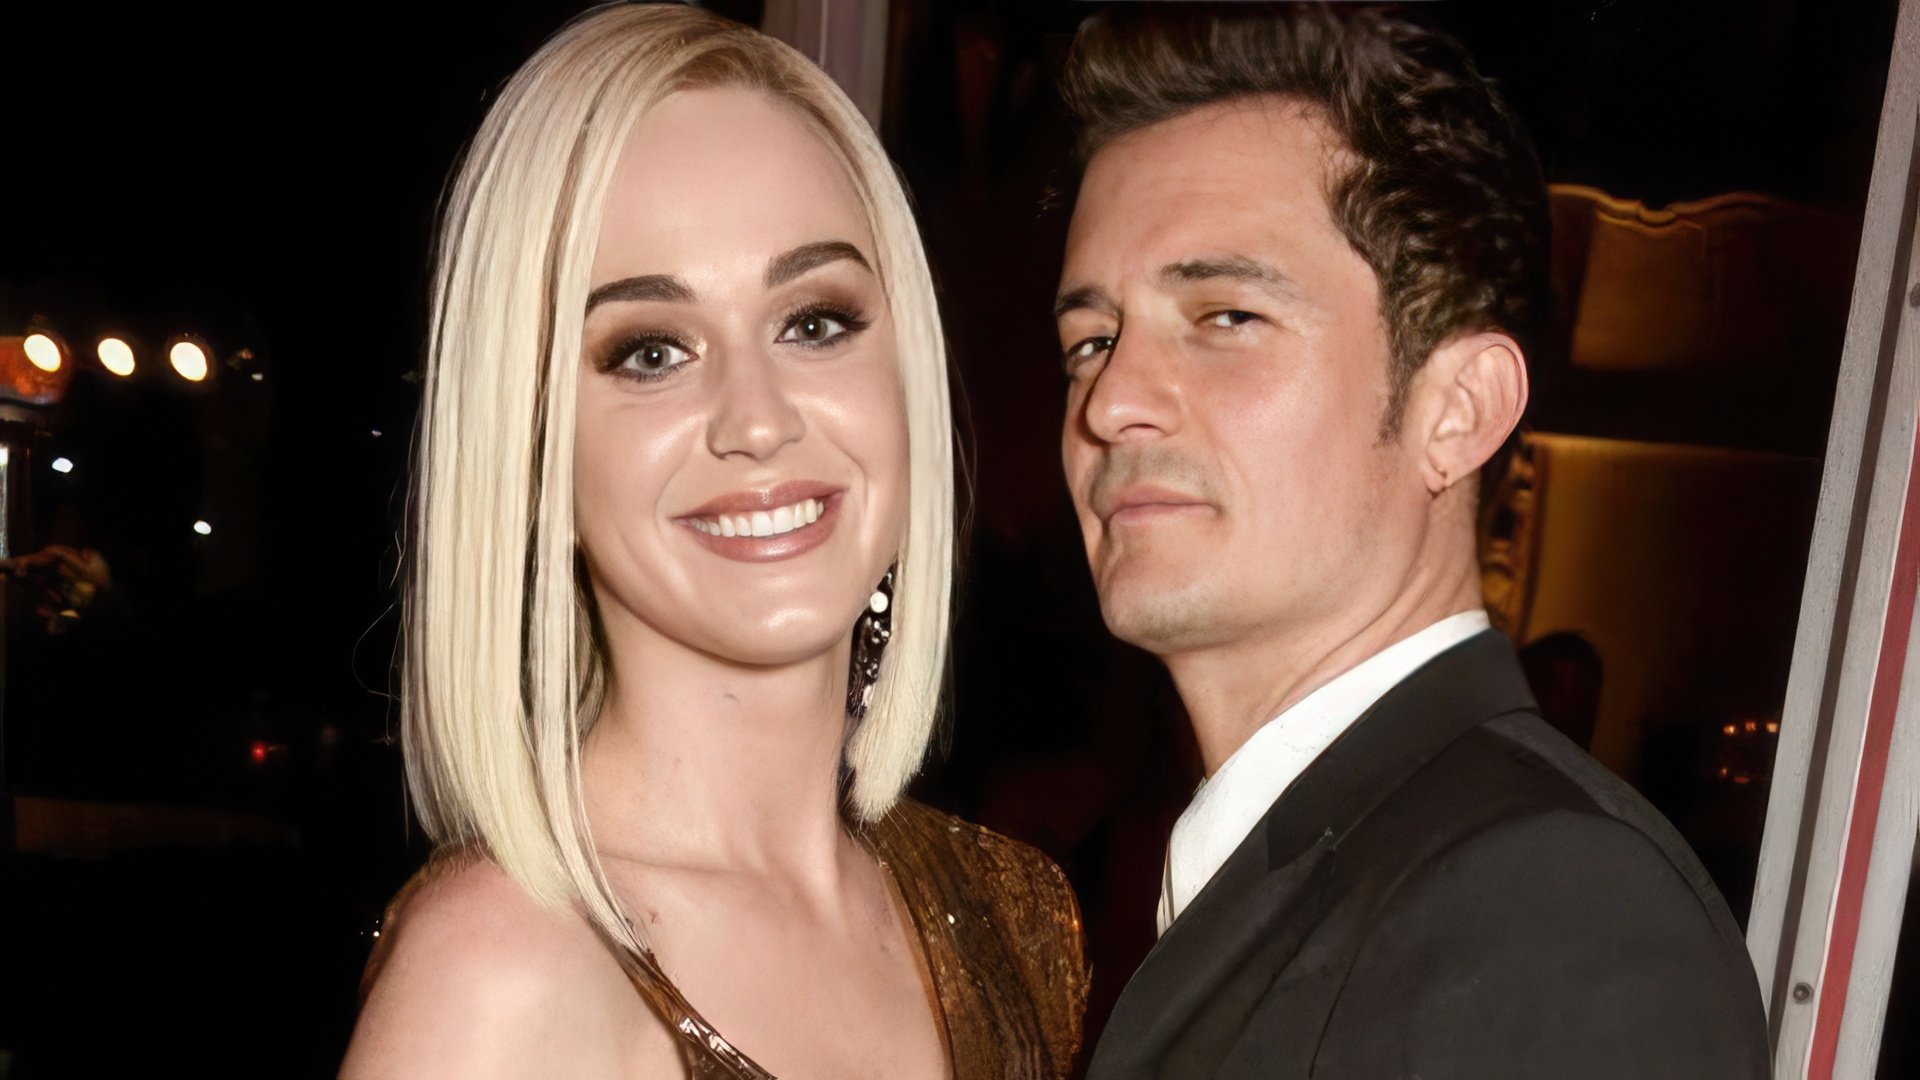 In 2017, Katy Perry and Orlando Bloom broke up